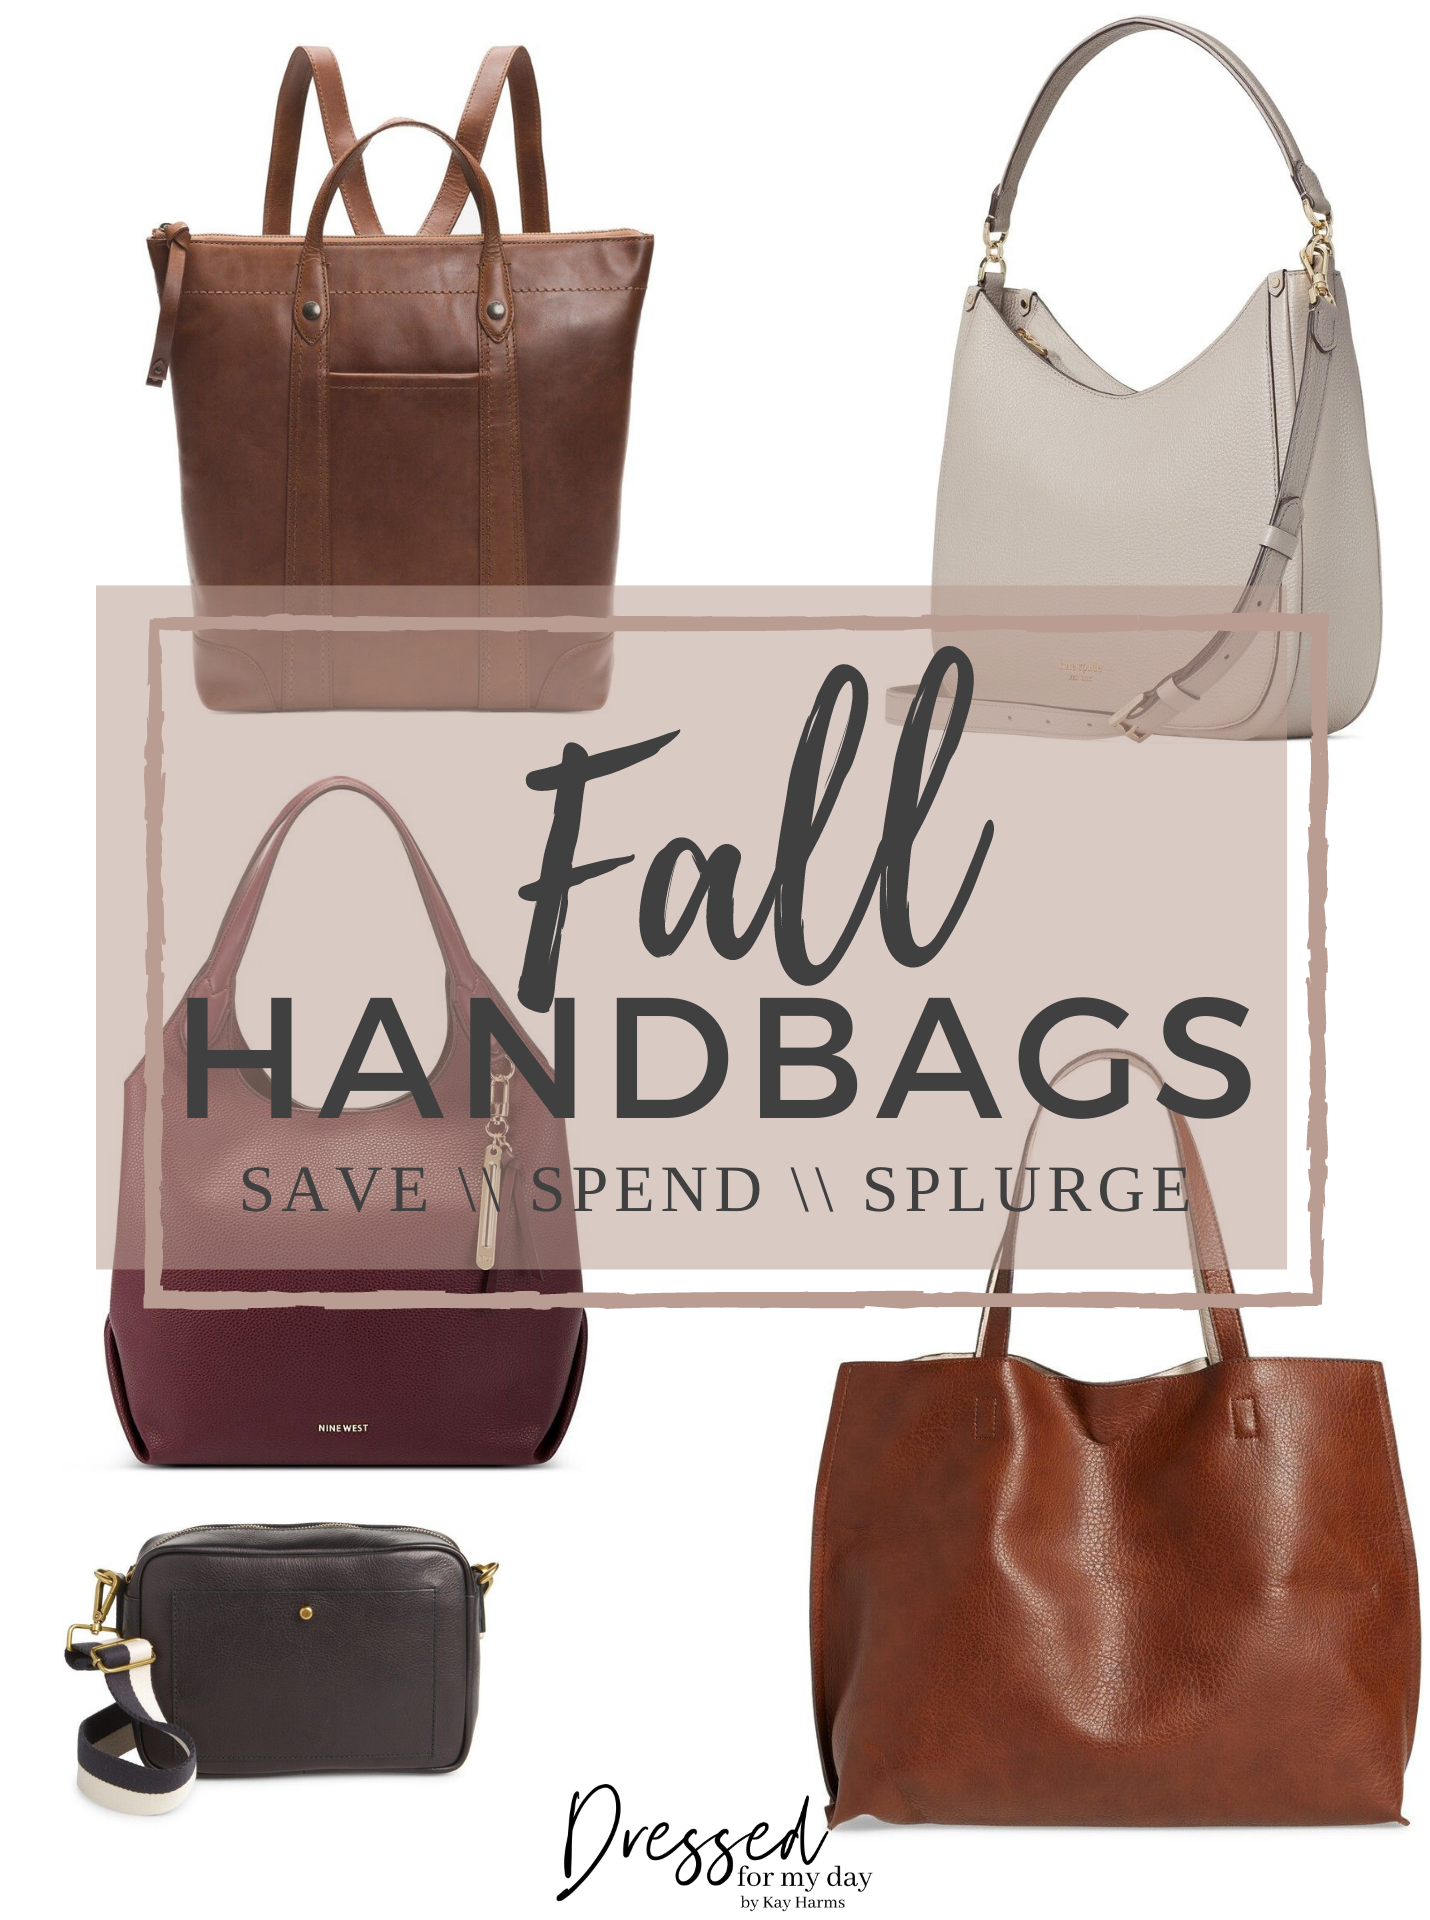 As Fall Approaches What Bags Are You Most Excited to Carry? - PurseBlog